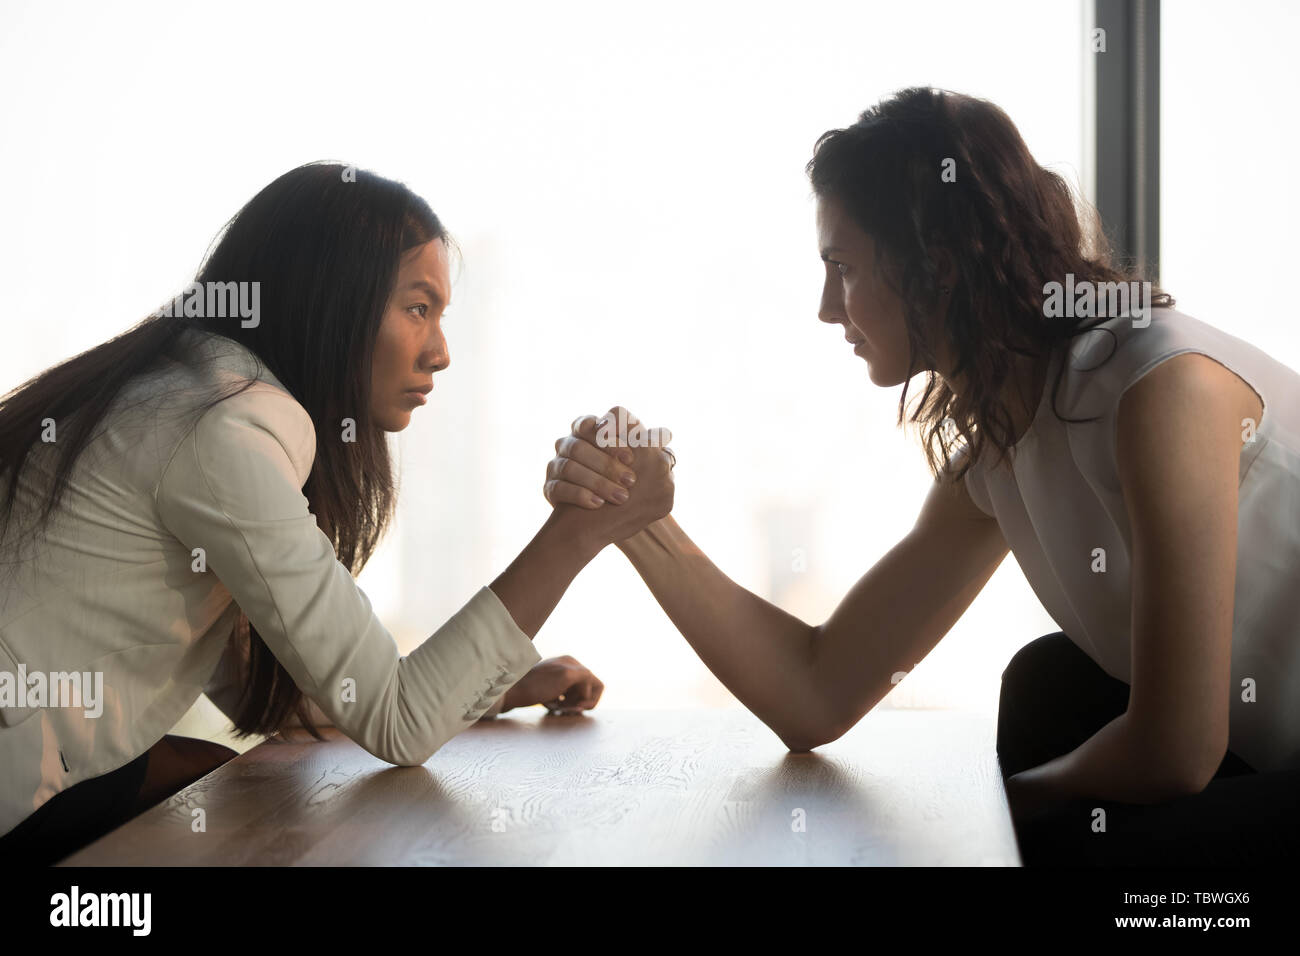 Strong women arm wrestle at work struggle for leadership Stock Photo